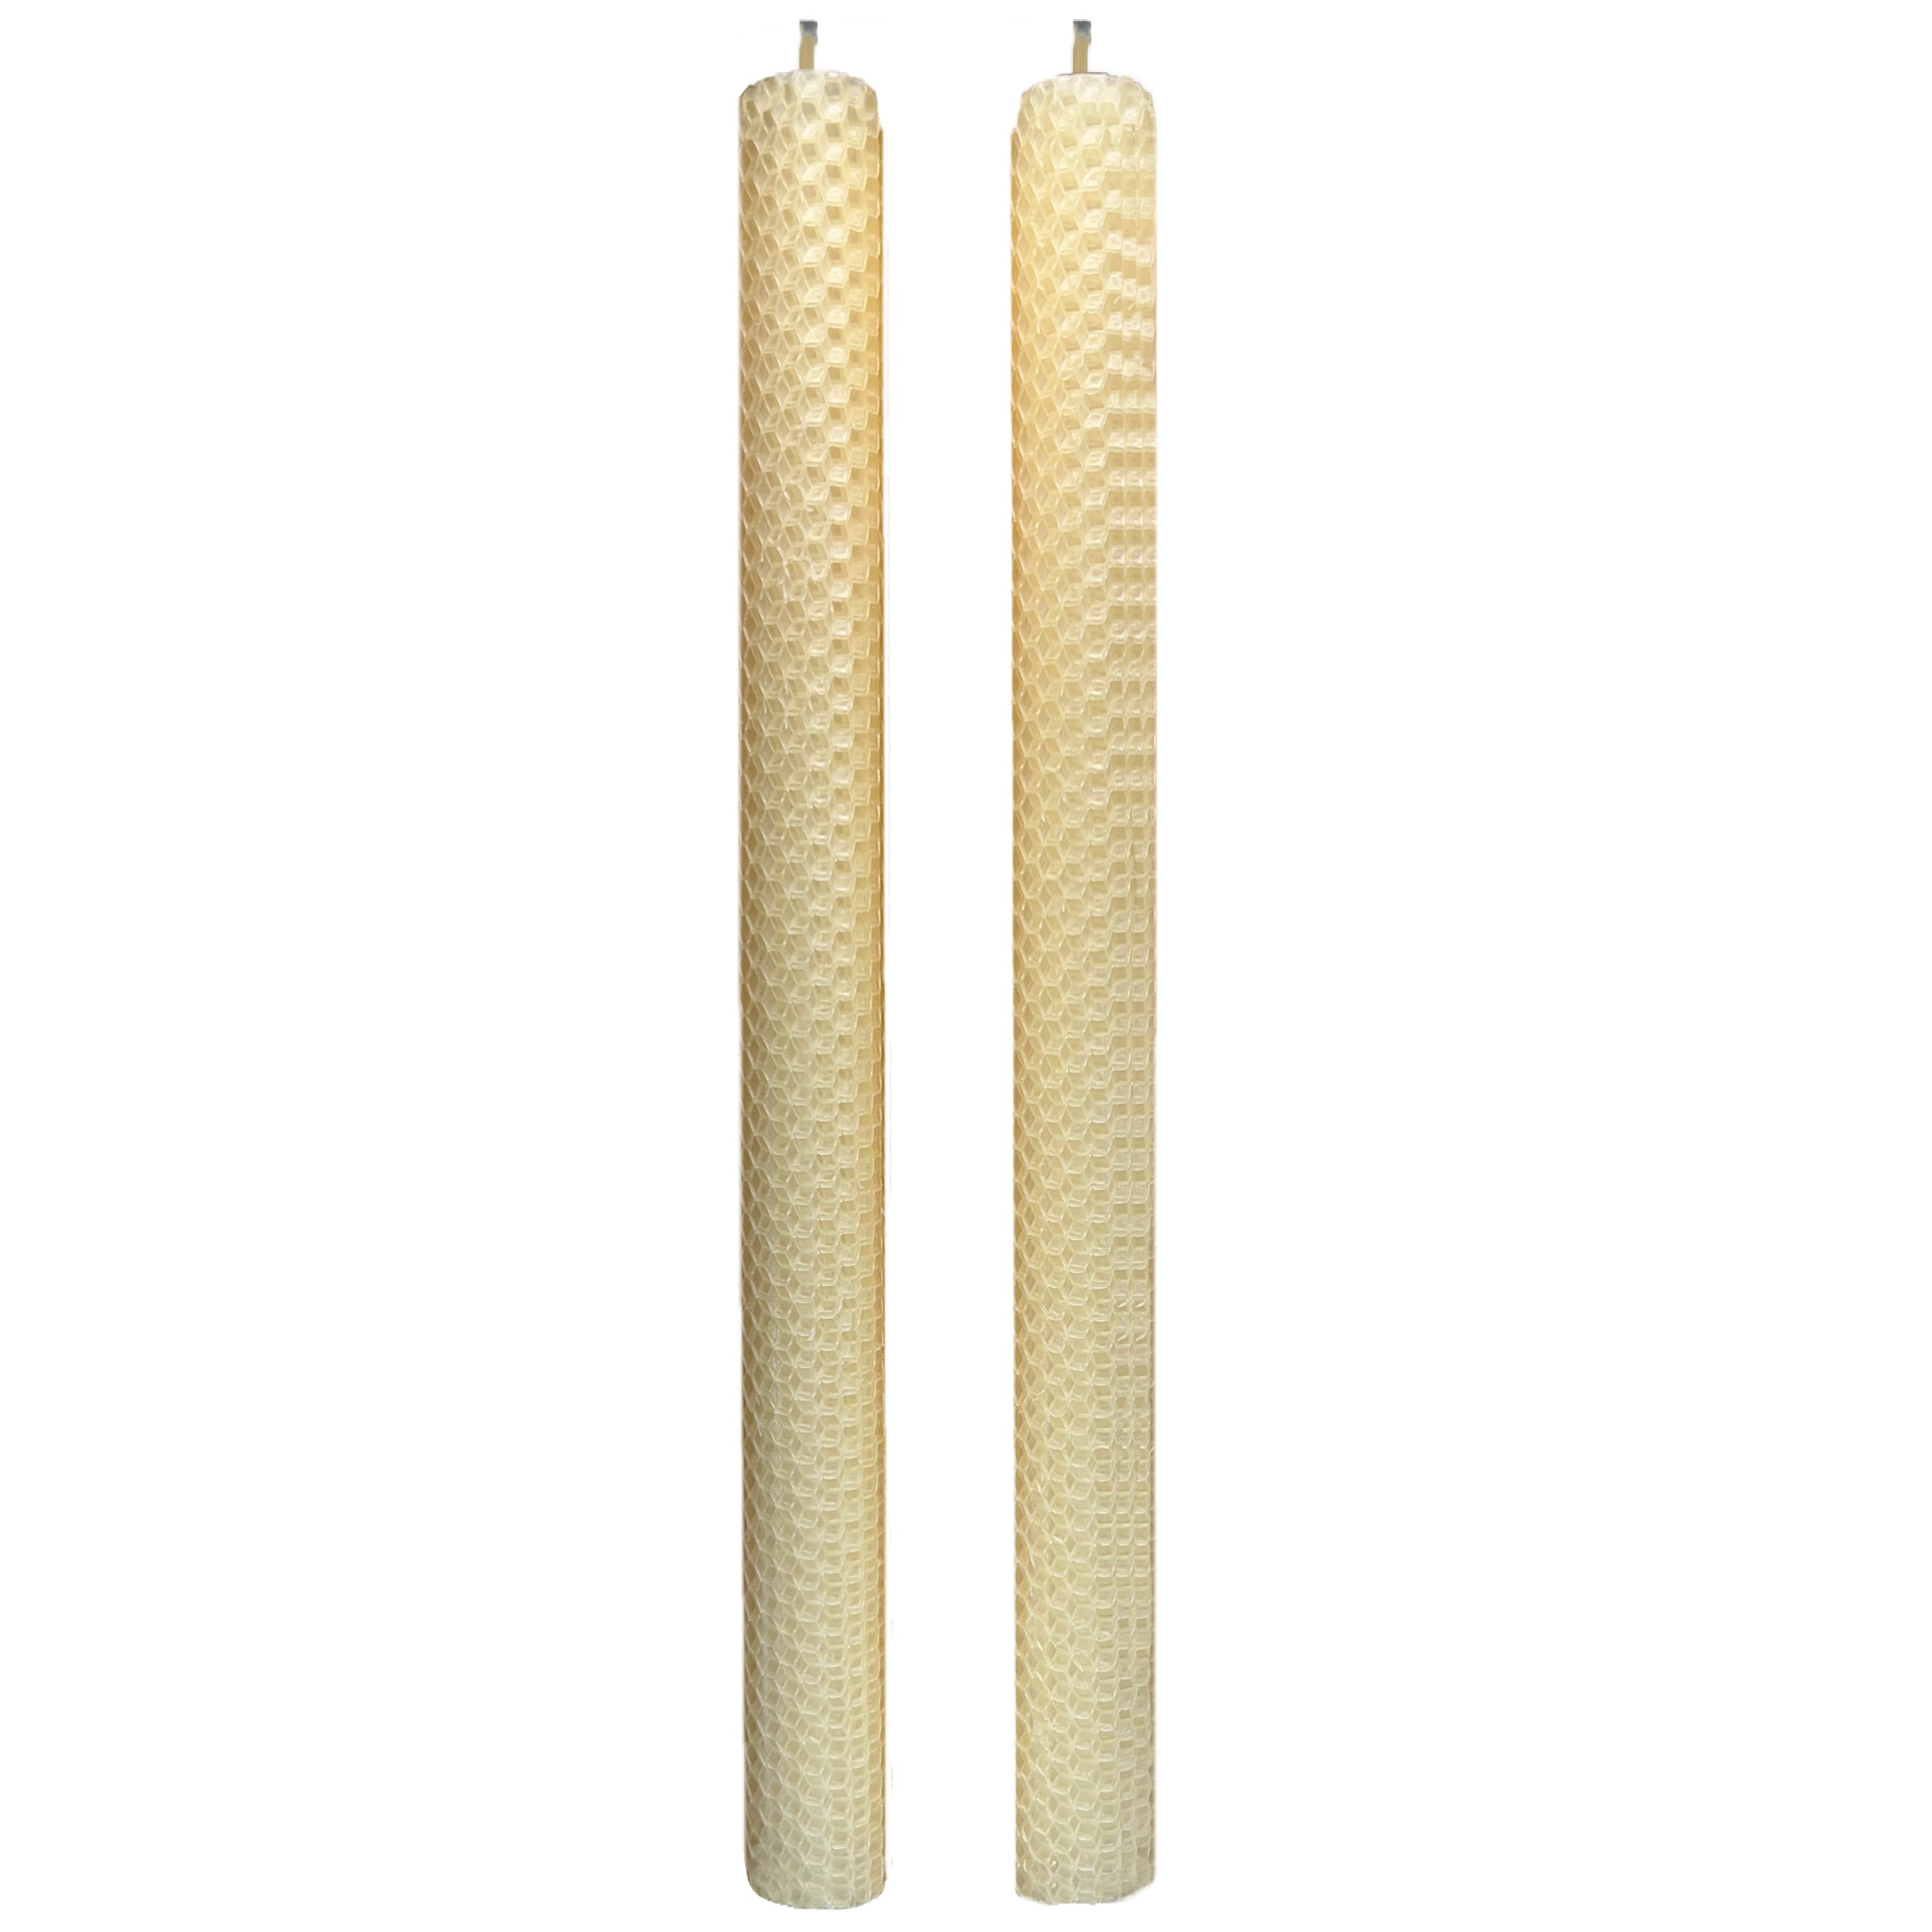 Dadant Rolled Beeswax Taper Candles – Classic Ivory – 7/8" x 12"– Pack of 2